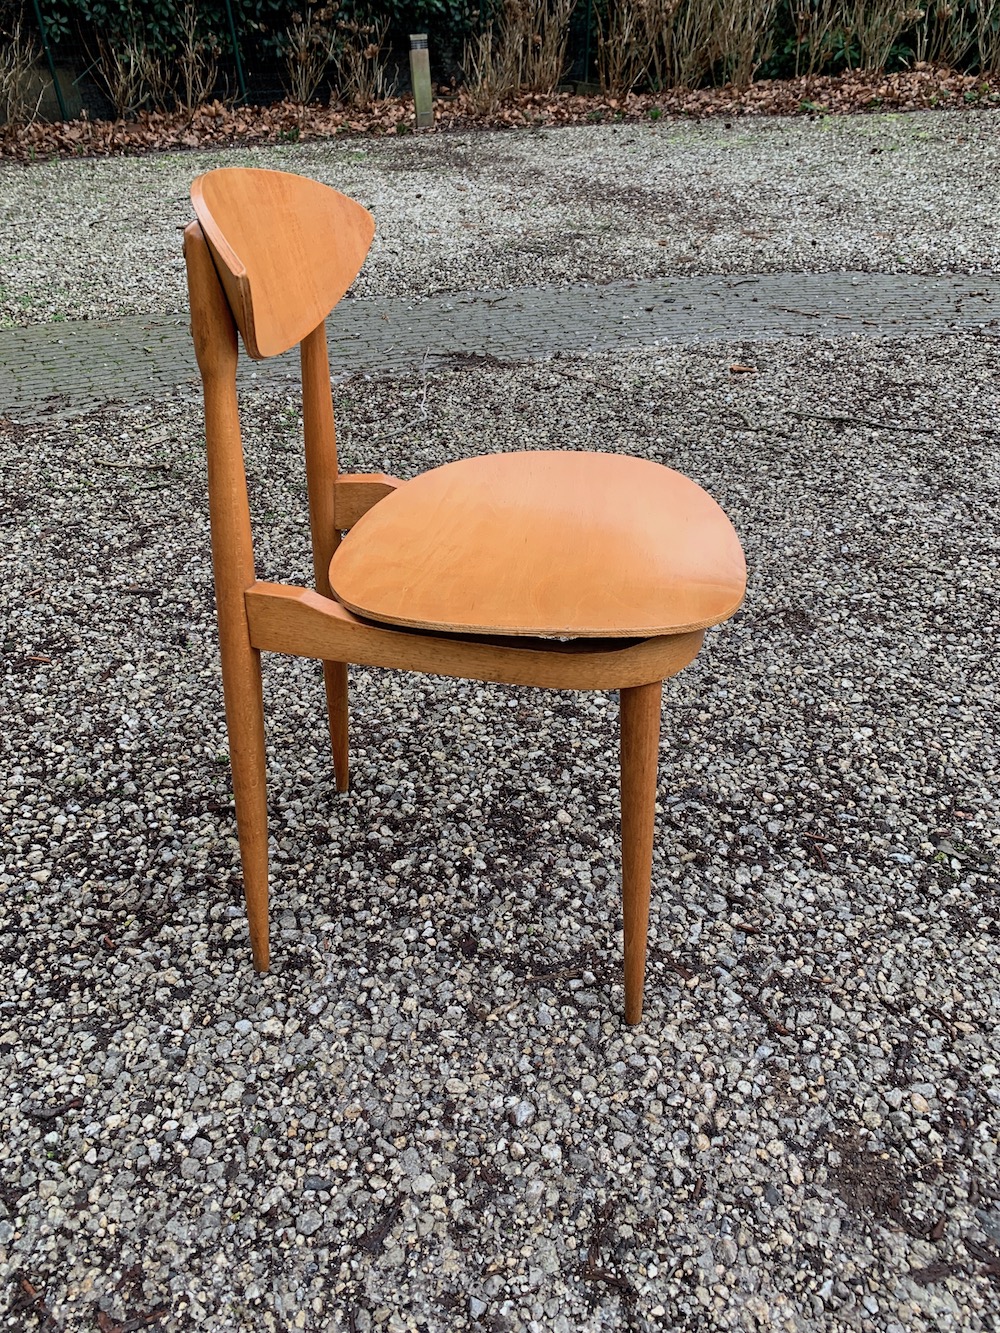 Pierre Guariche chairs, dining chairs, vintage dining chairs, wooden vintage chairs, vintage chairs, wooden chairs, midmod, midcentturymodern design, design chairs, chaises vintage, chaises à diner, interior decoration, chaises bois, chaises salle à mange